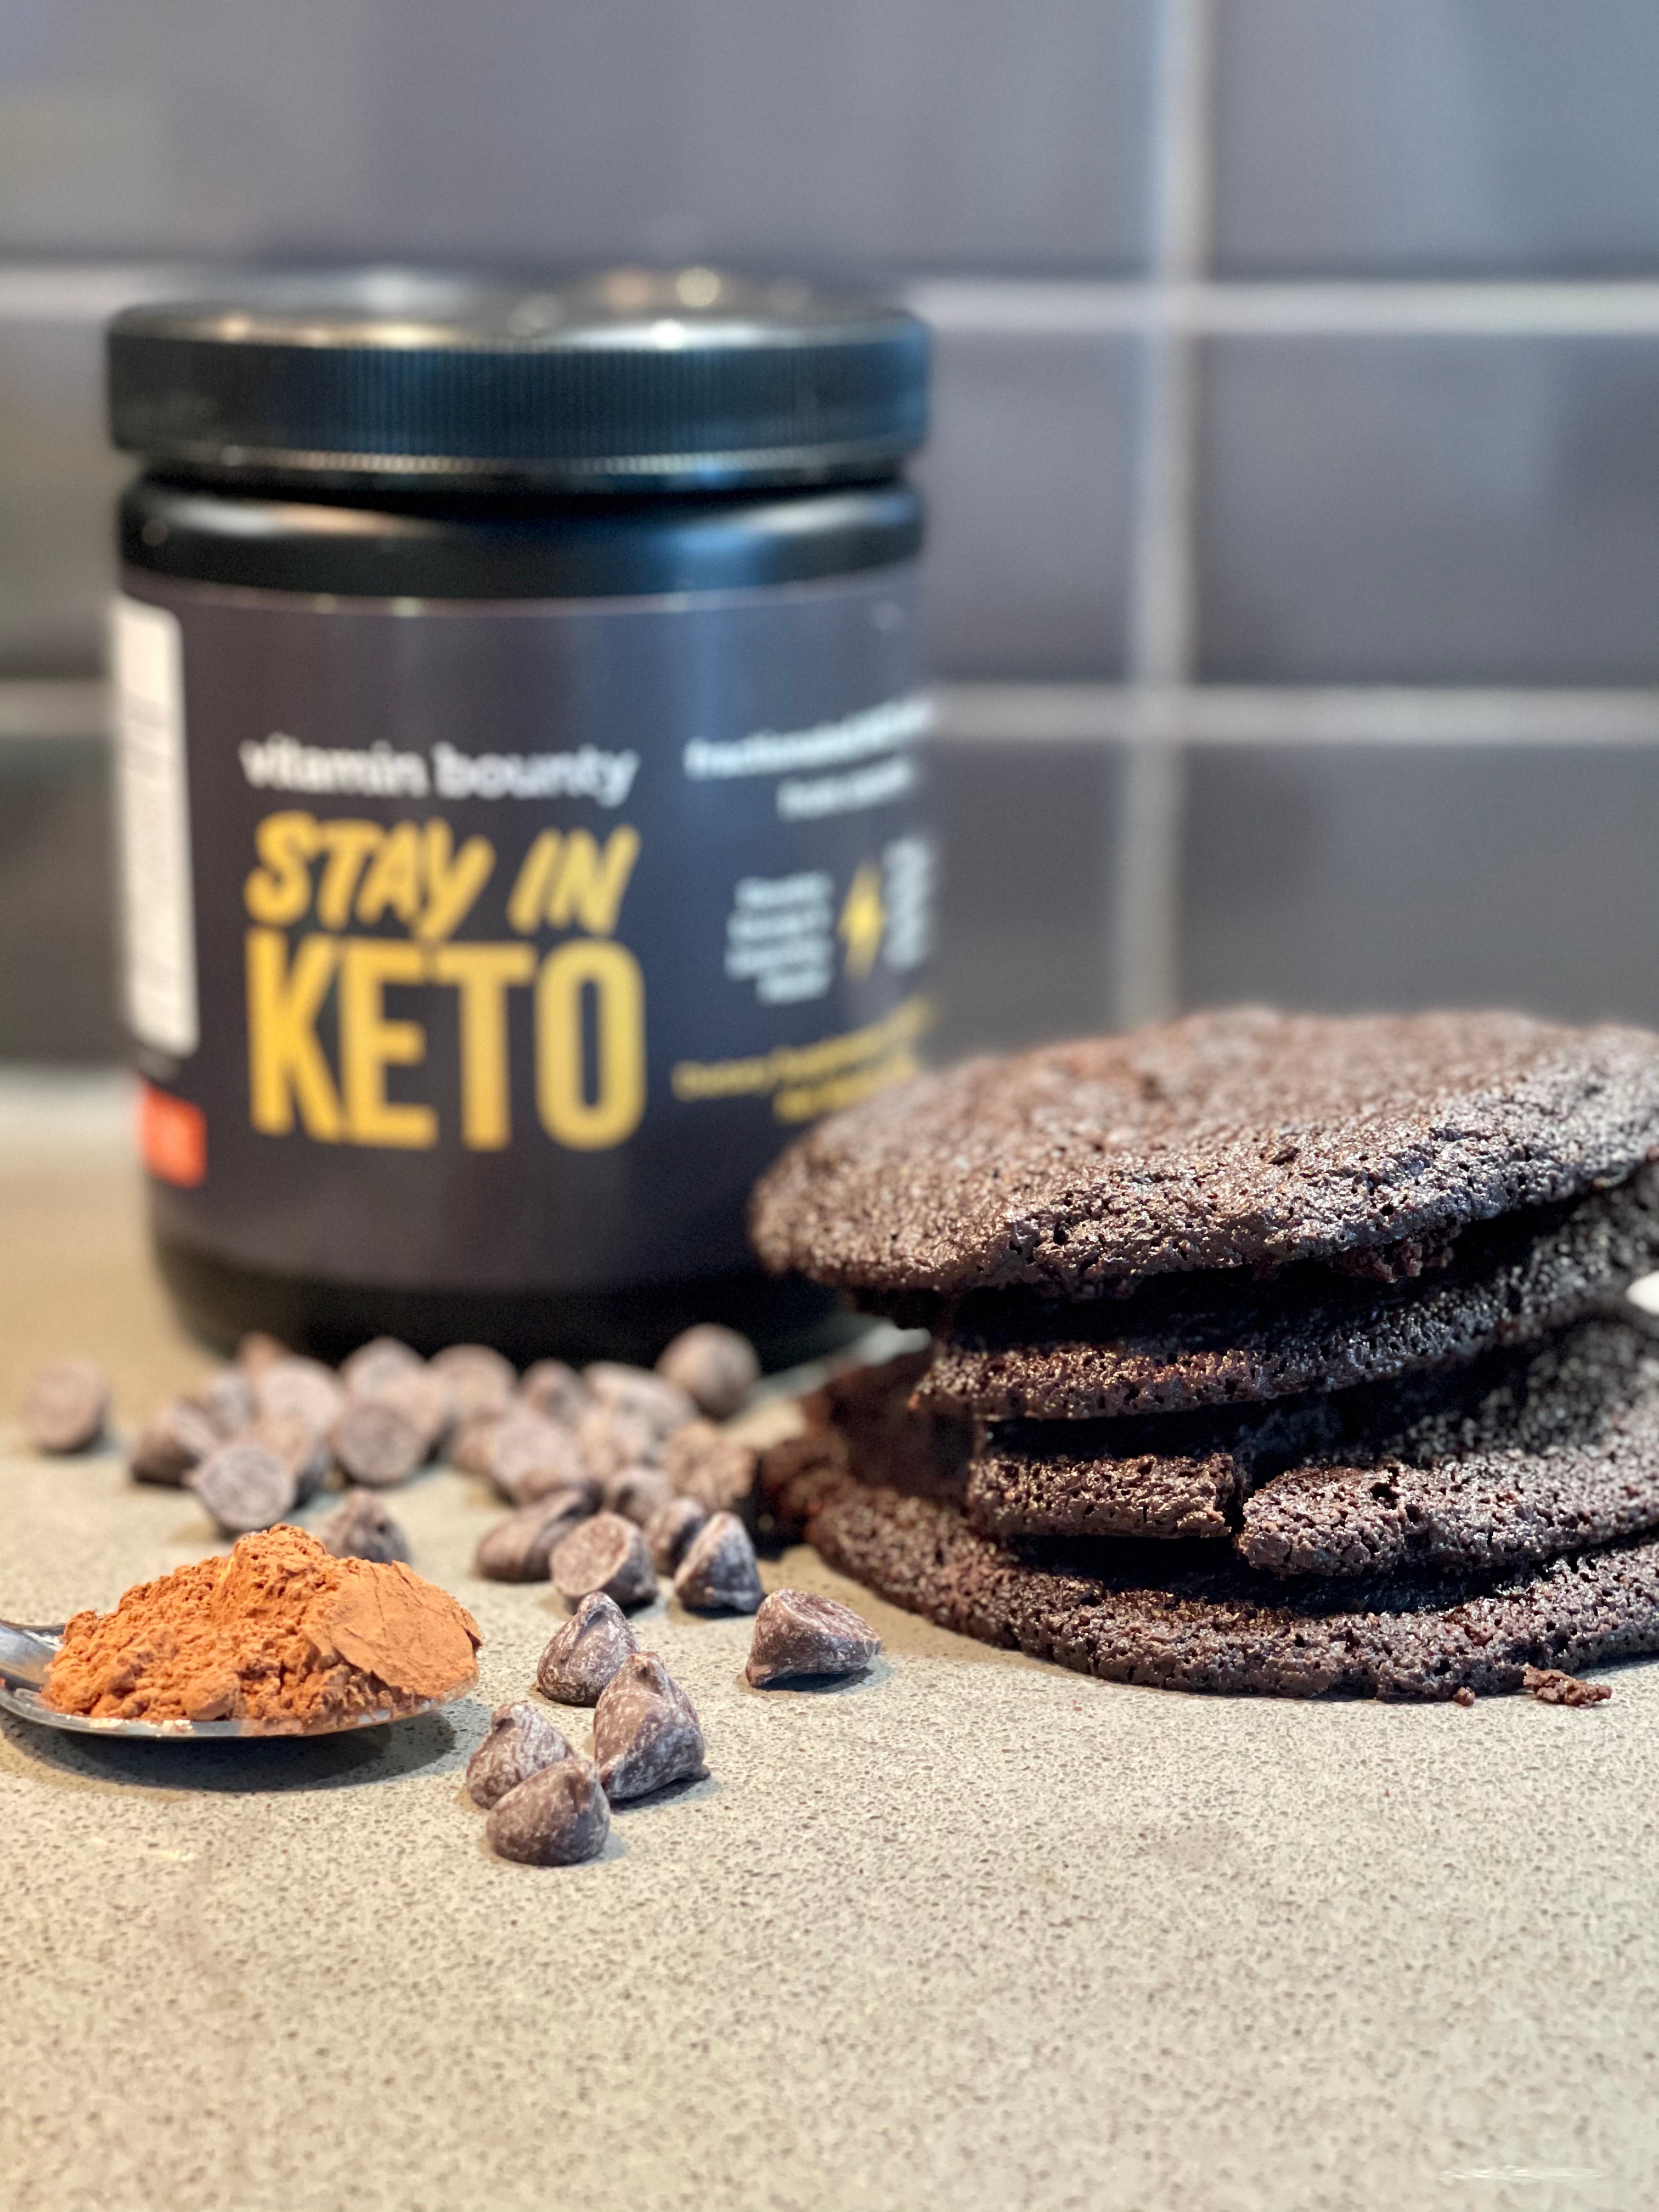 Chocolate Chip Cookies with Stay in Keto MCT Powder